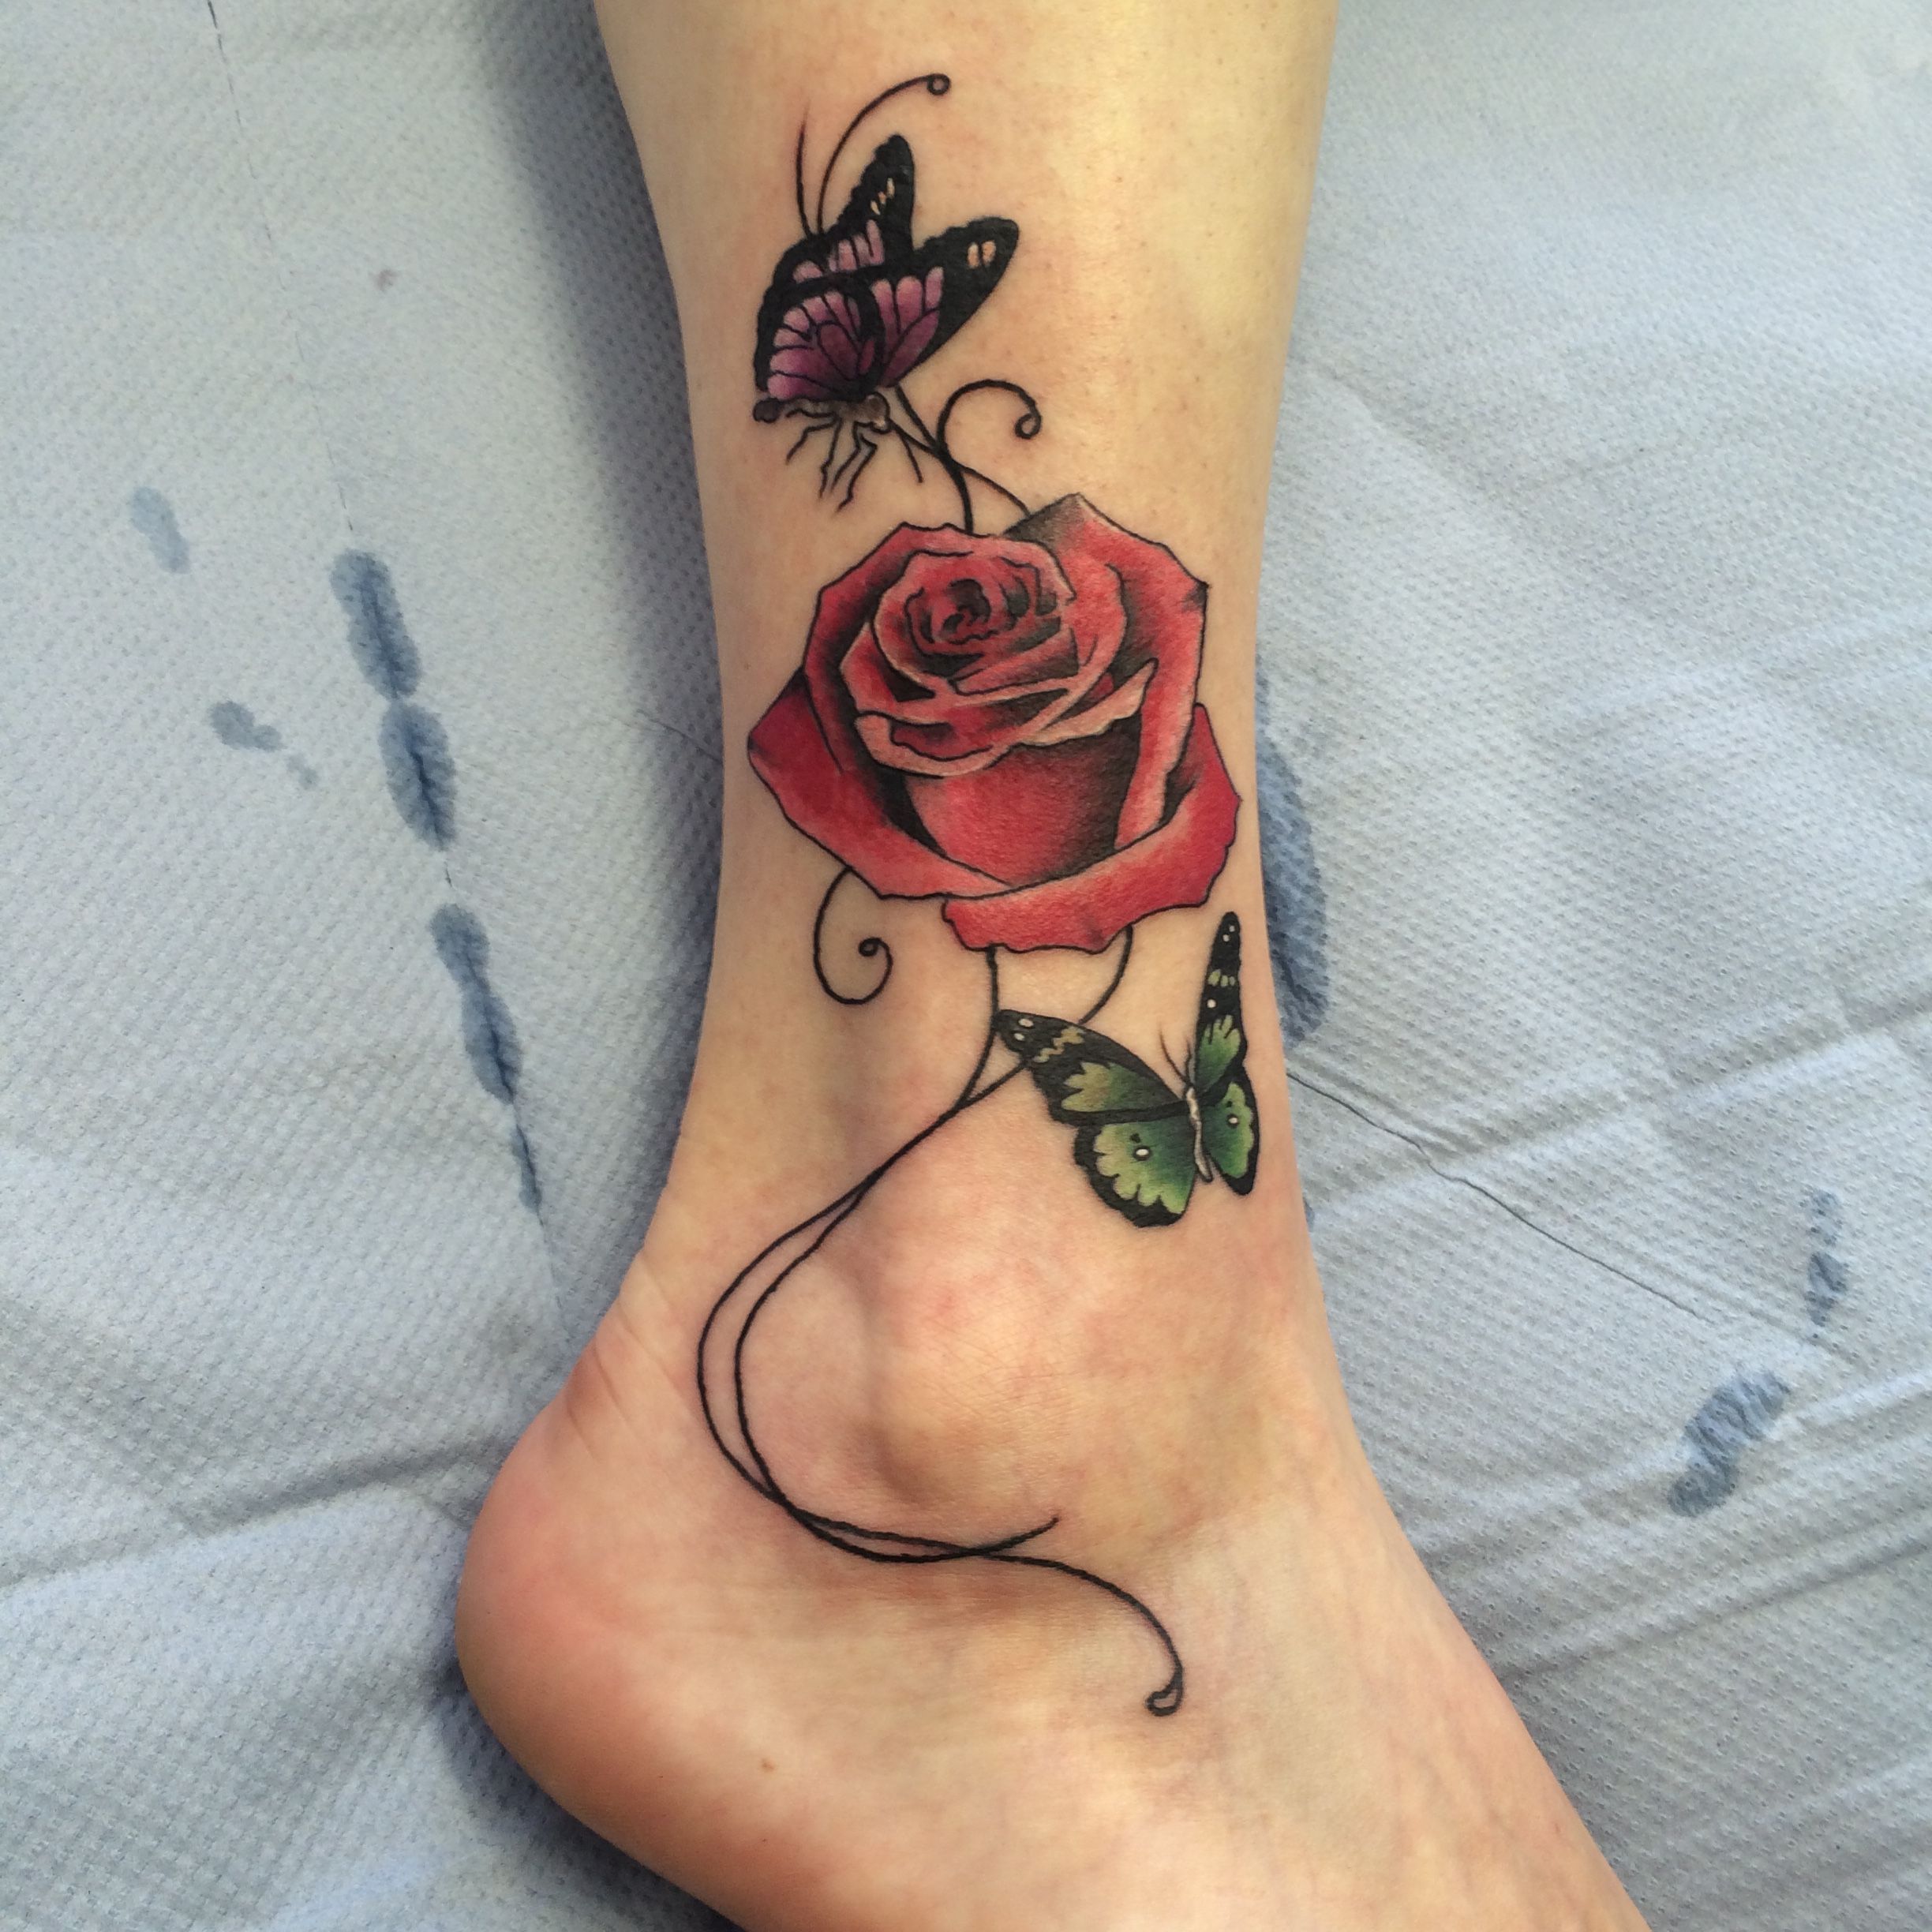 rose and butterfly ankle tattoo done by Travis Allen at twisted tattoo Yaxley Www.twistedtattoo.co.uk Or fine us on Facebook -   18 rose butterfly tattoo
 ideas